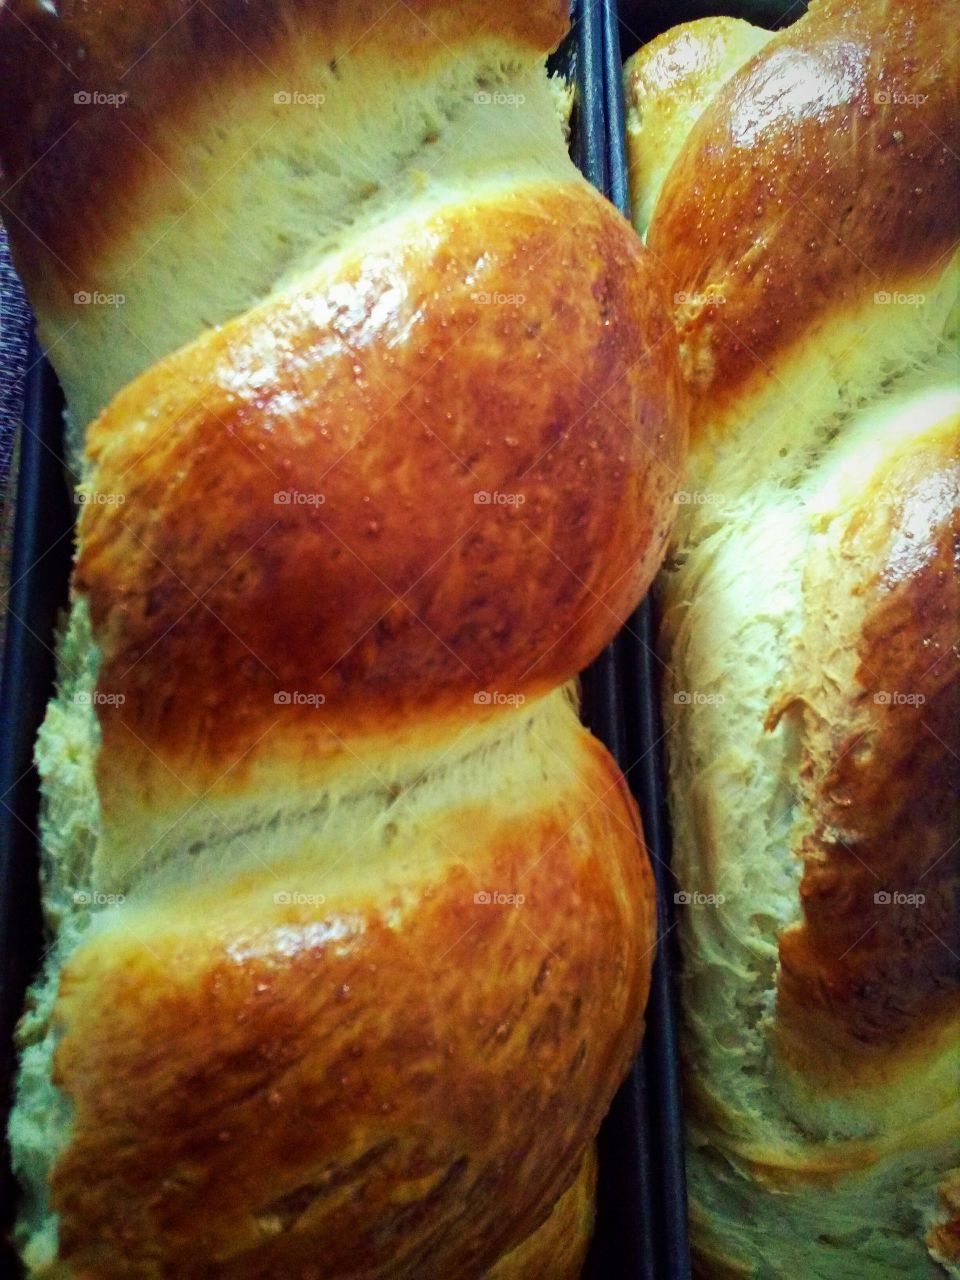 Bread made at home